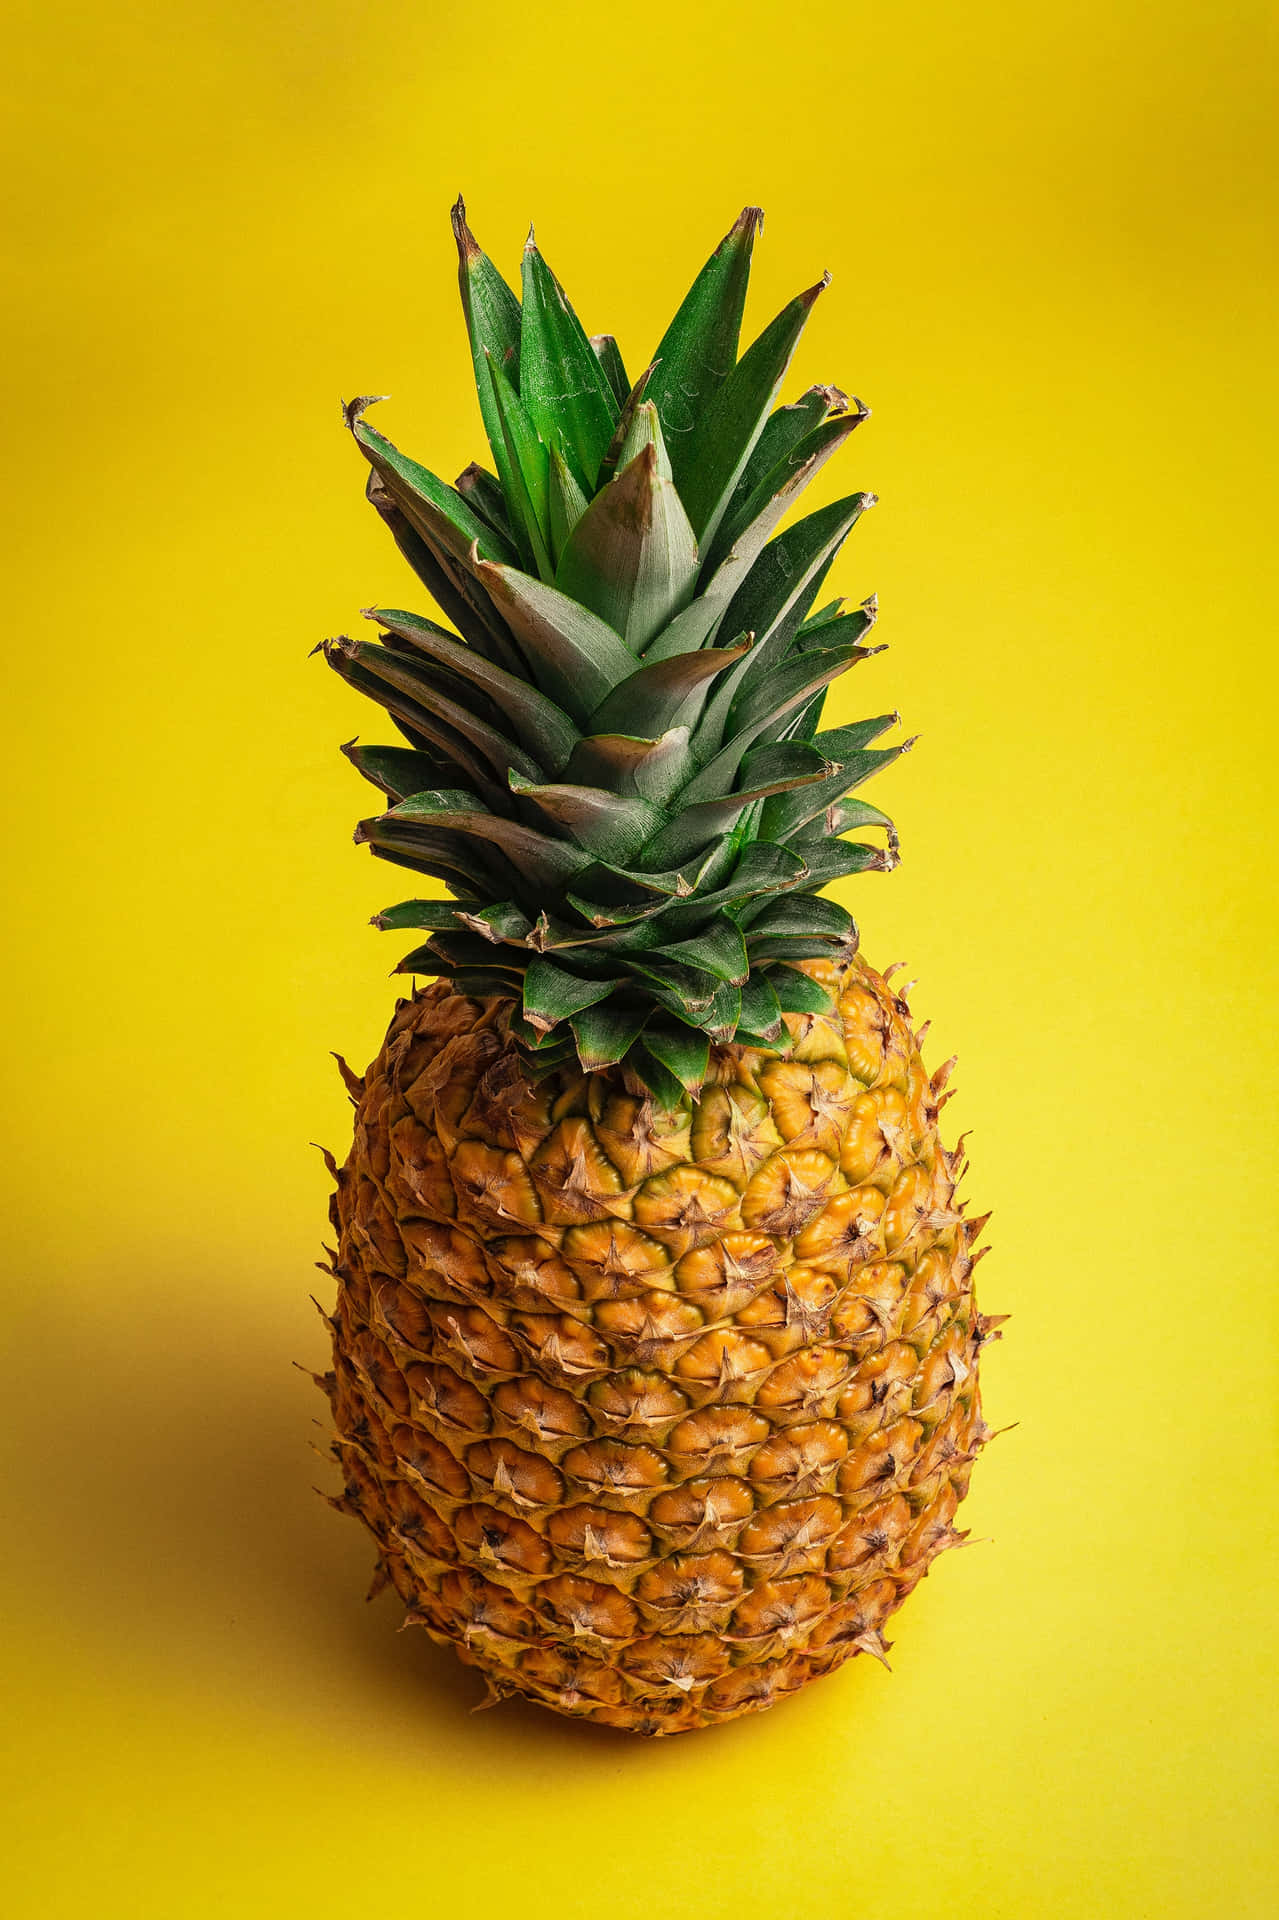 Enjoy the sweet taste of nature with a refreshing pineapple!